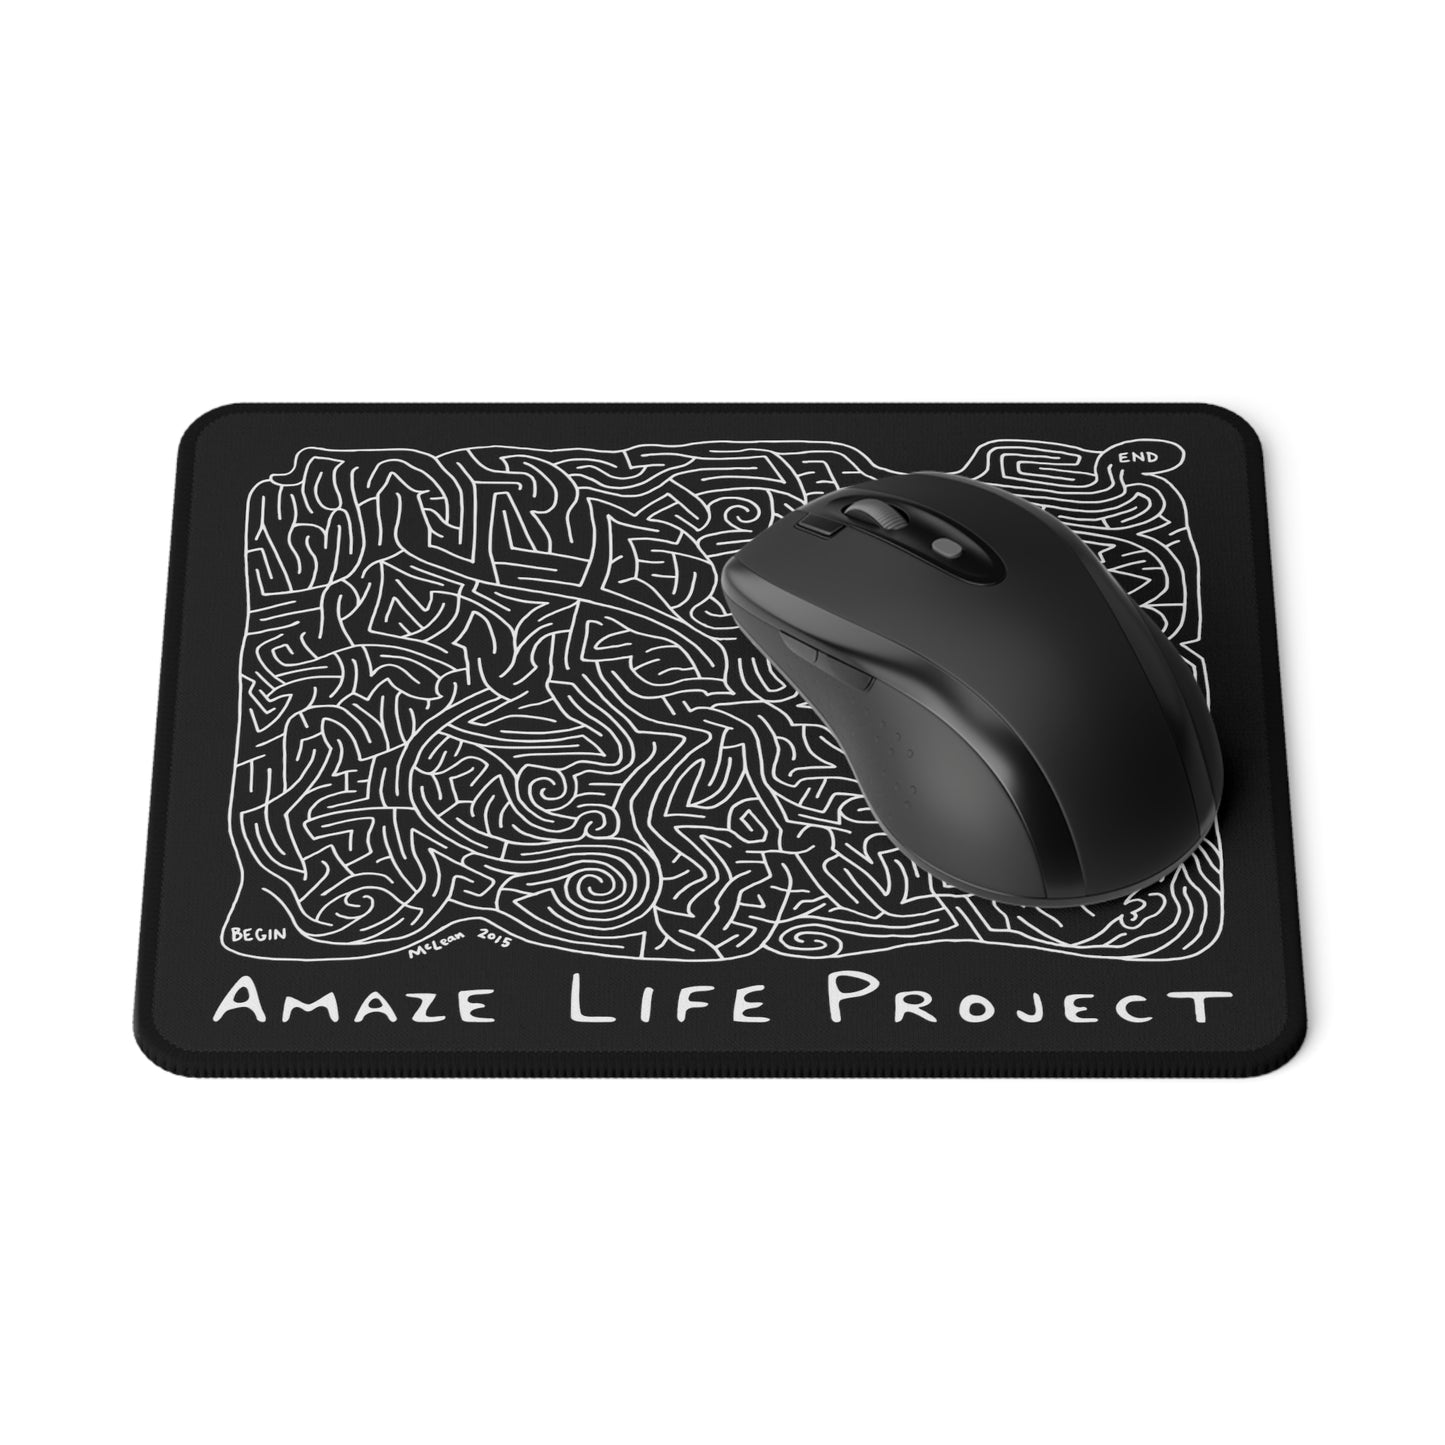 The Daydreamer Mouse Pad - Black